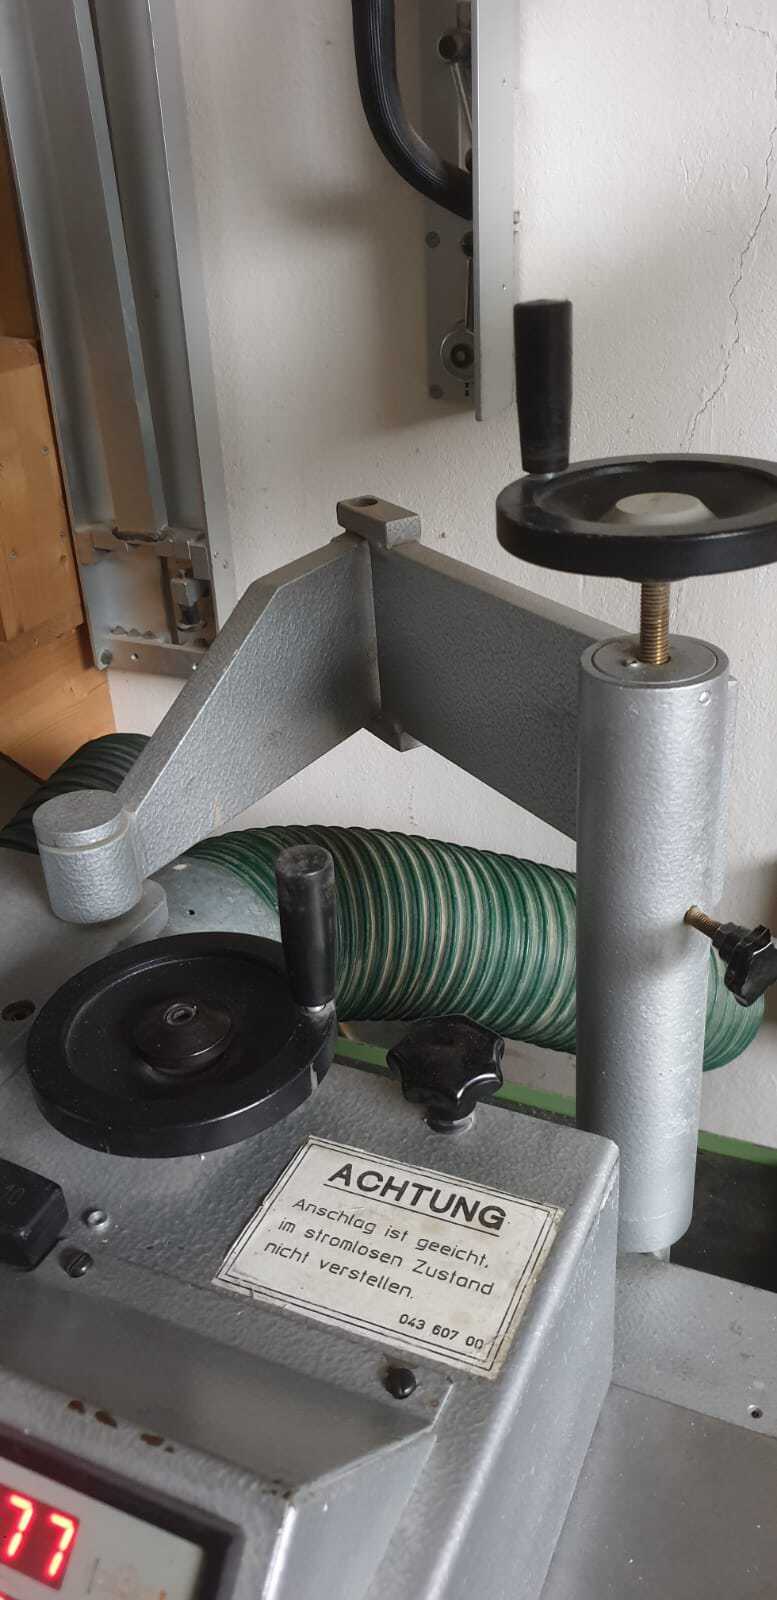 Martin Swivel Spindle Moulder with feed unit and positioning control - second-hand T25 (5)